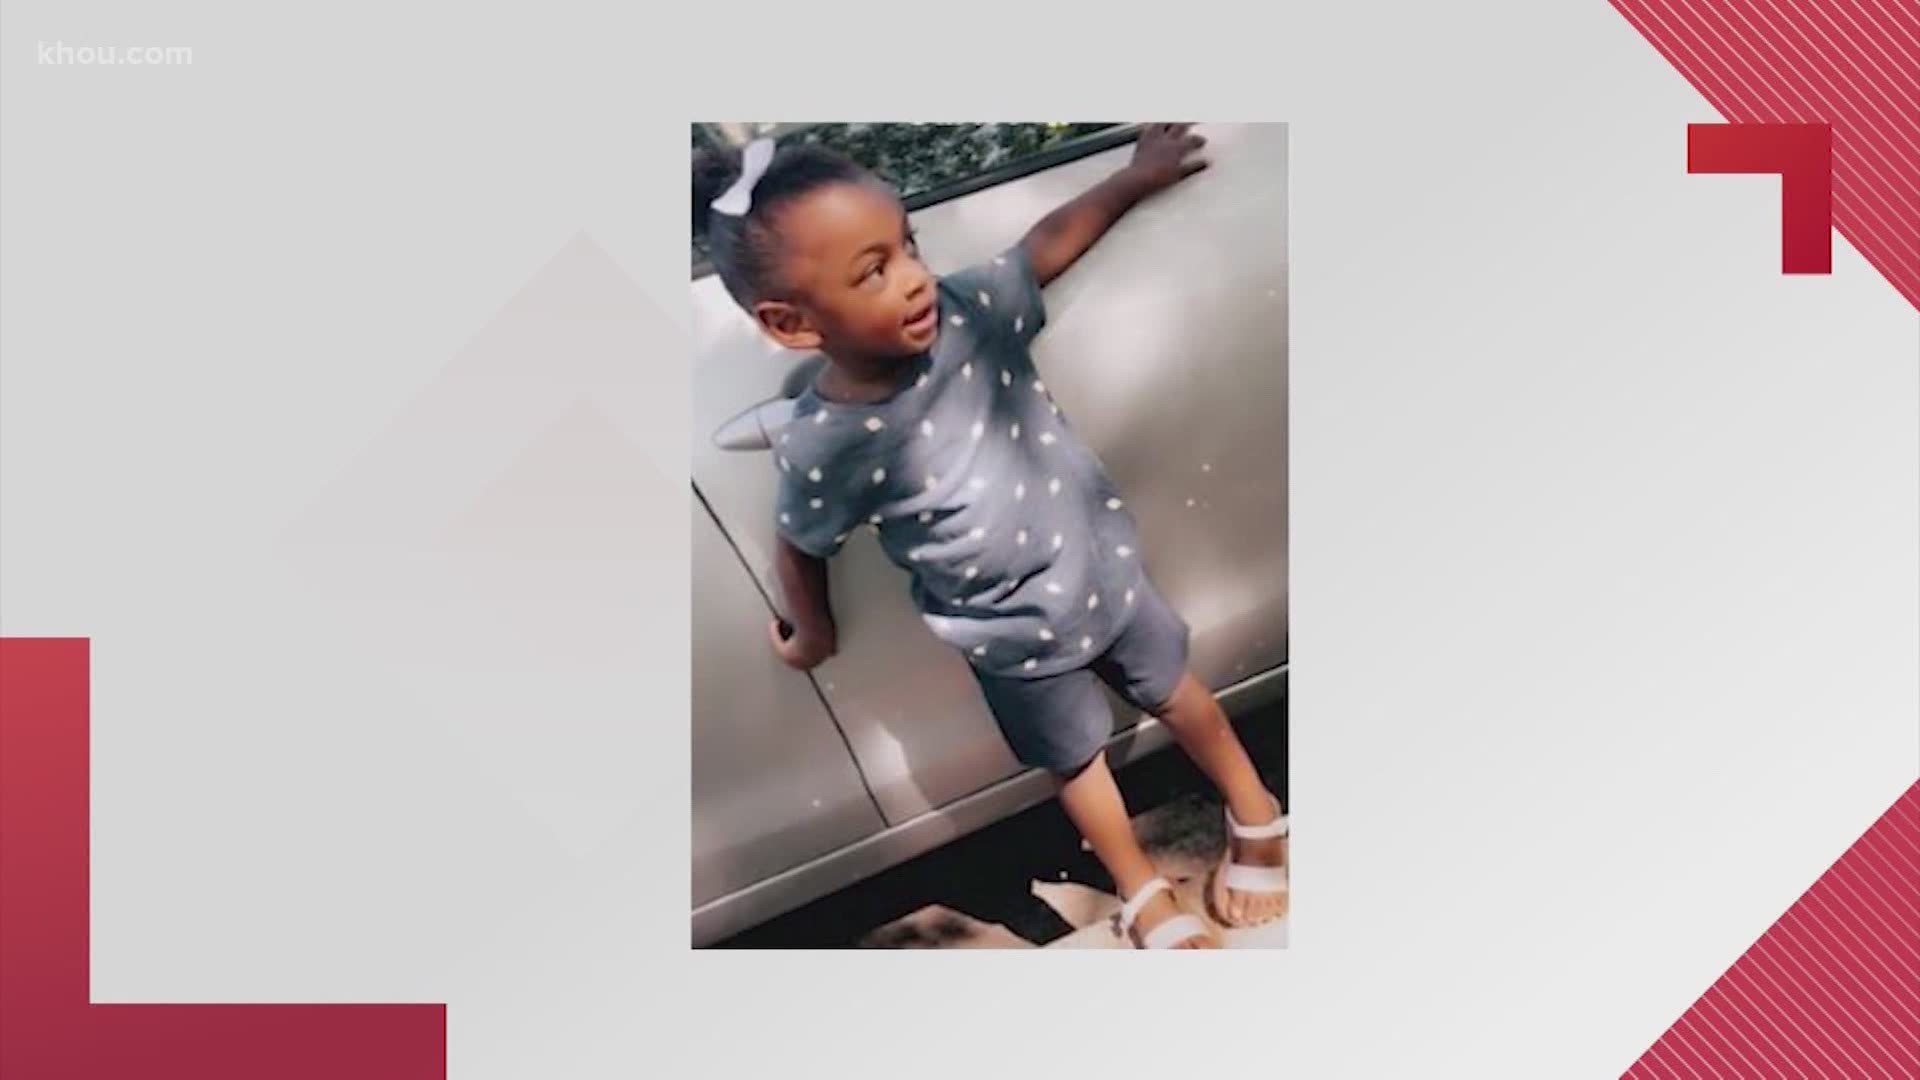 Maliyah, who goes by the nickname "Tootie," was last seen Saturday morning in the 10600 block Beechnut Street.